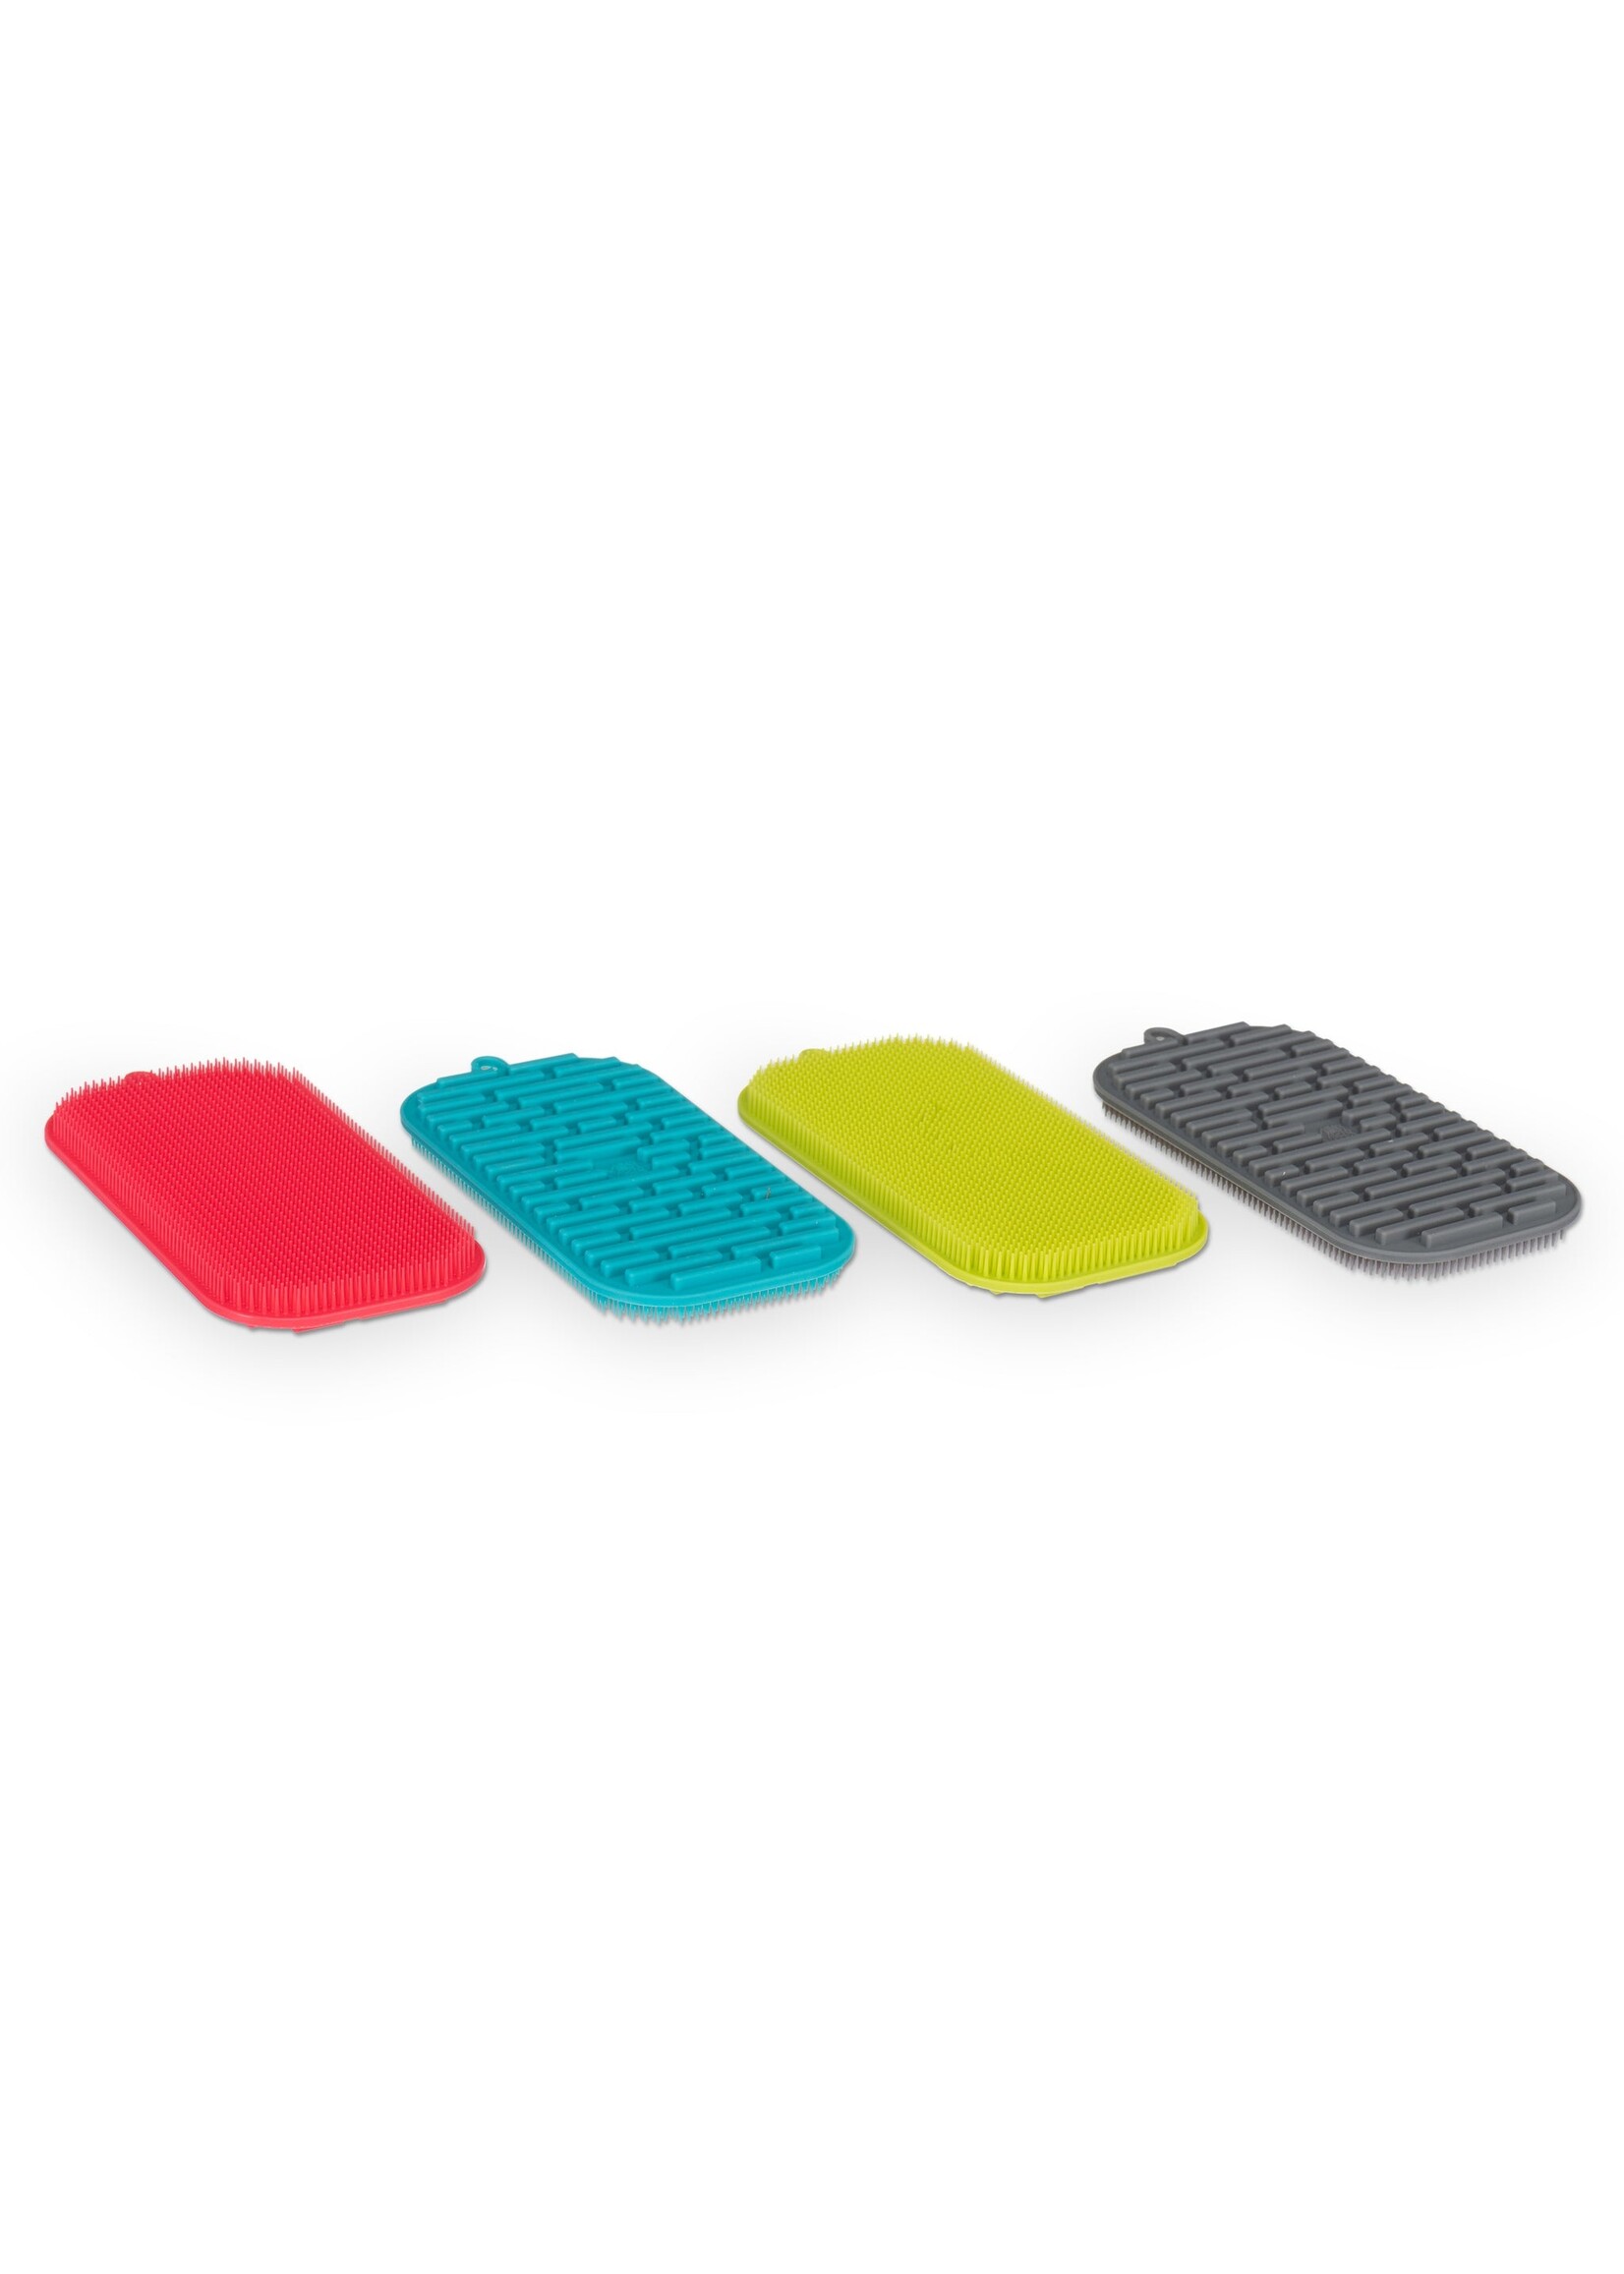 Messy Mutts Messy Mutts Silicone Dual Sided Bowl Scrubber